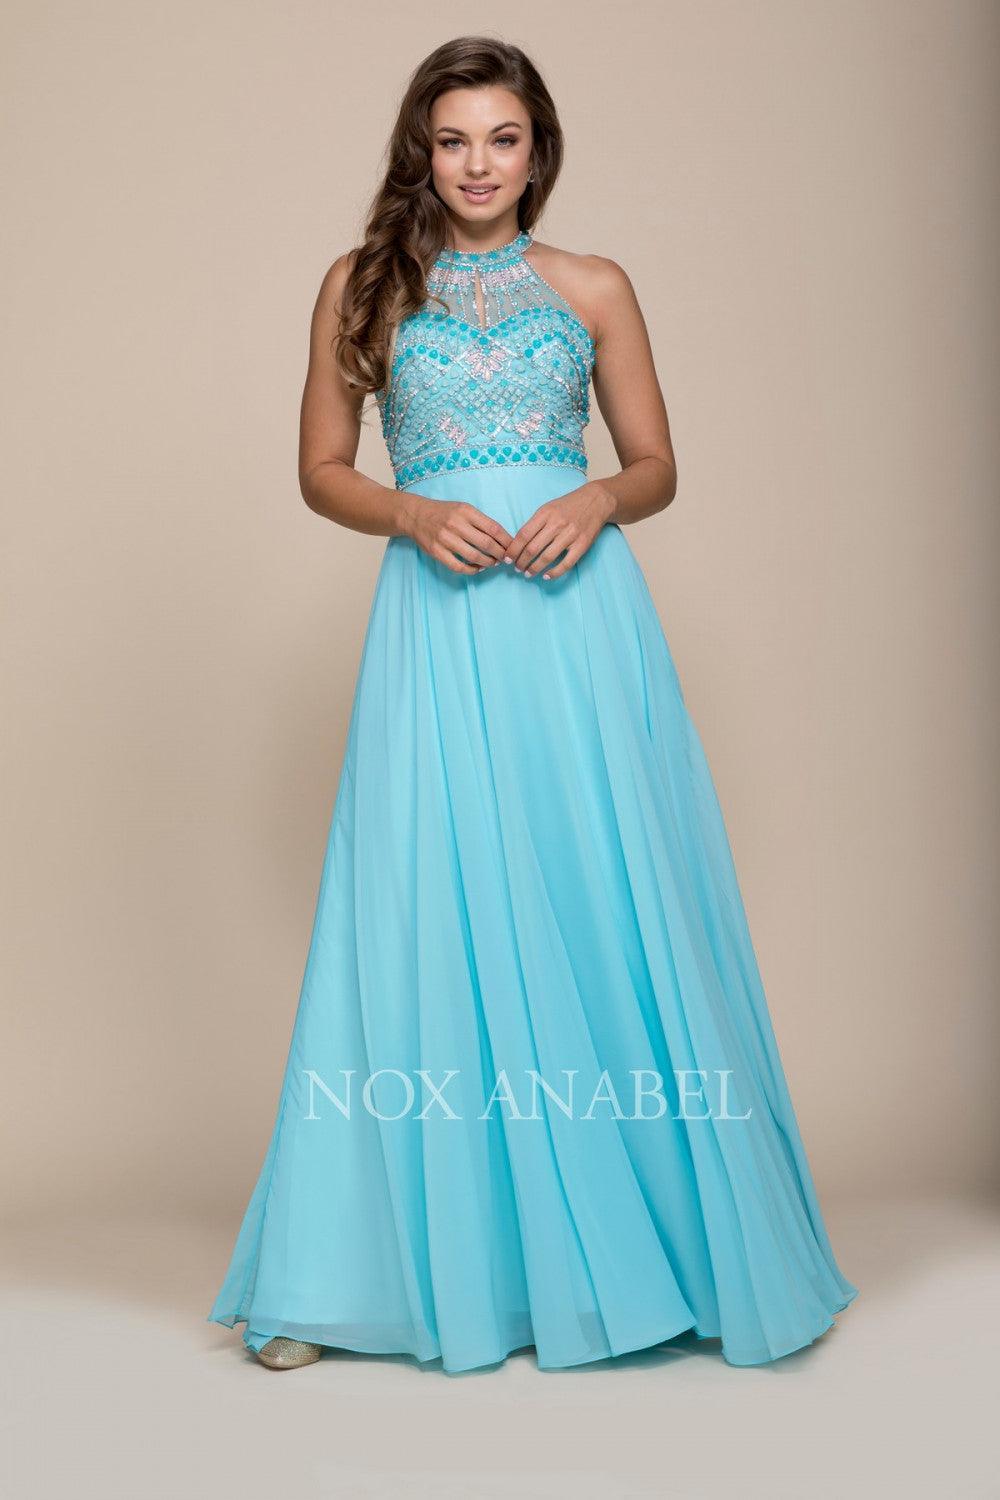 Long Open Back Prom Dress Evening Gown - The Dress Outlet